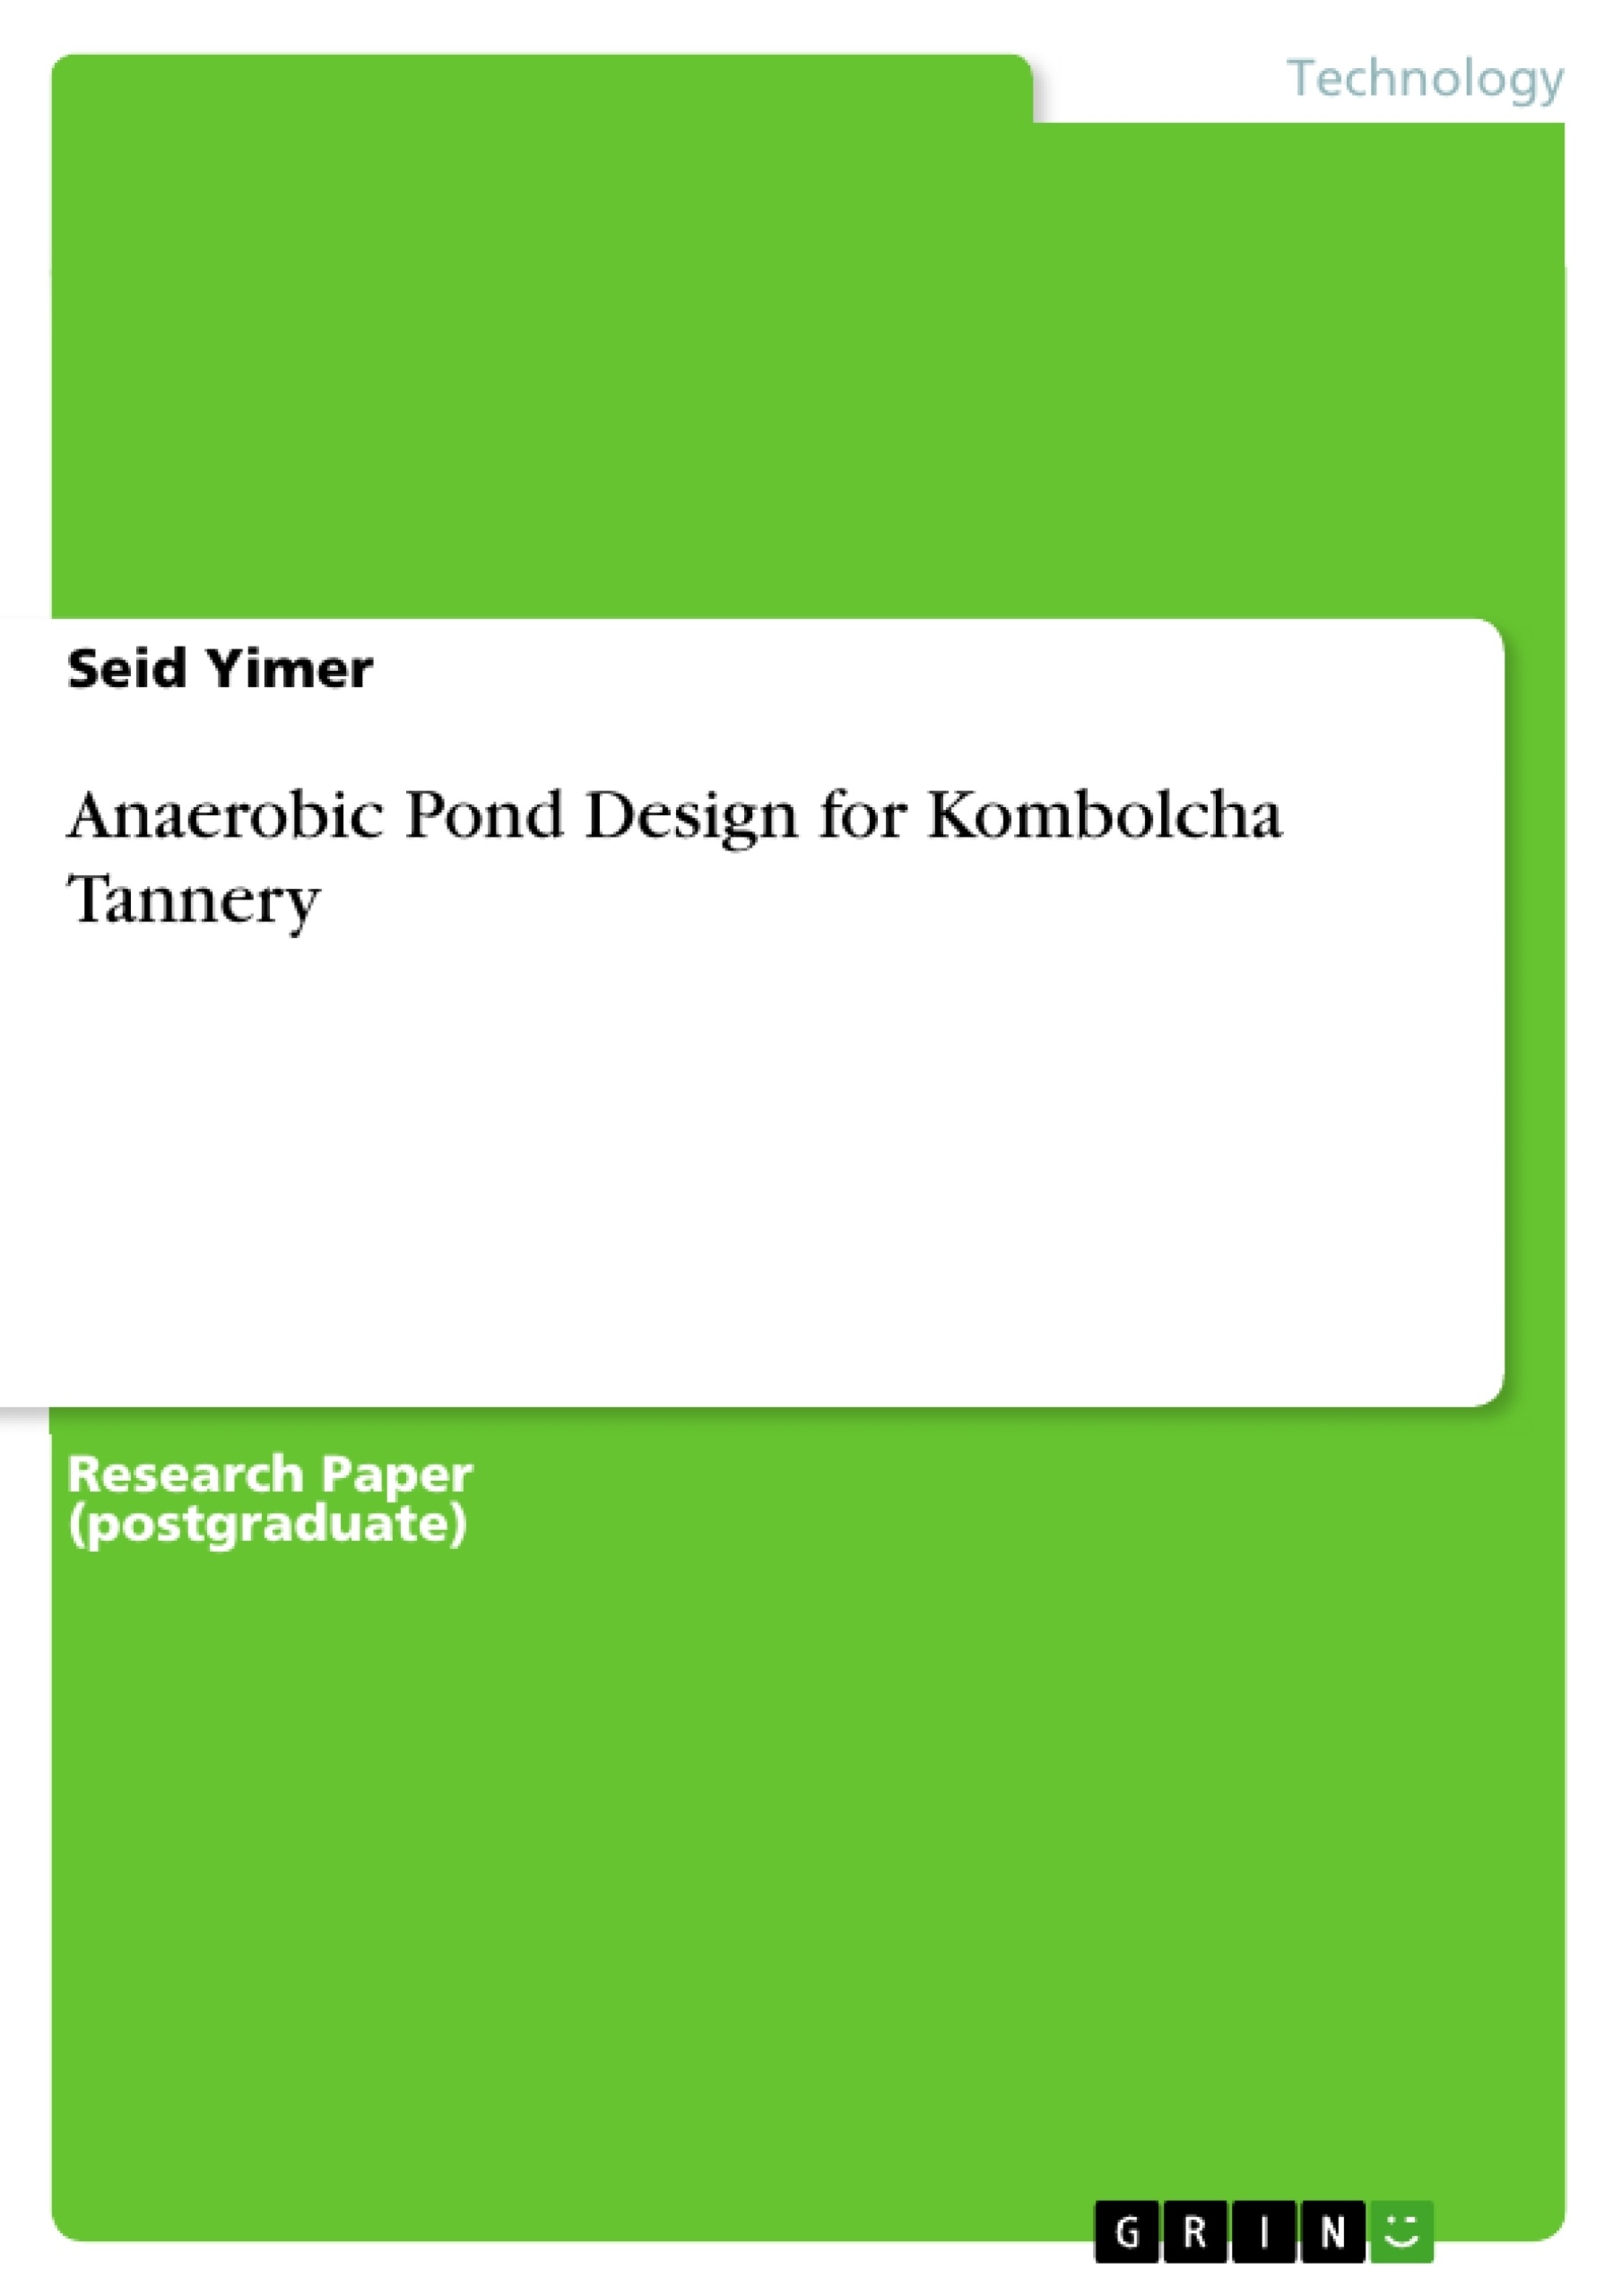 Título: Anaerobic Pond Design for Kombolcha Tannery